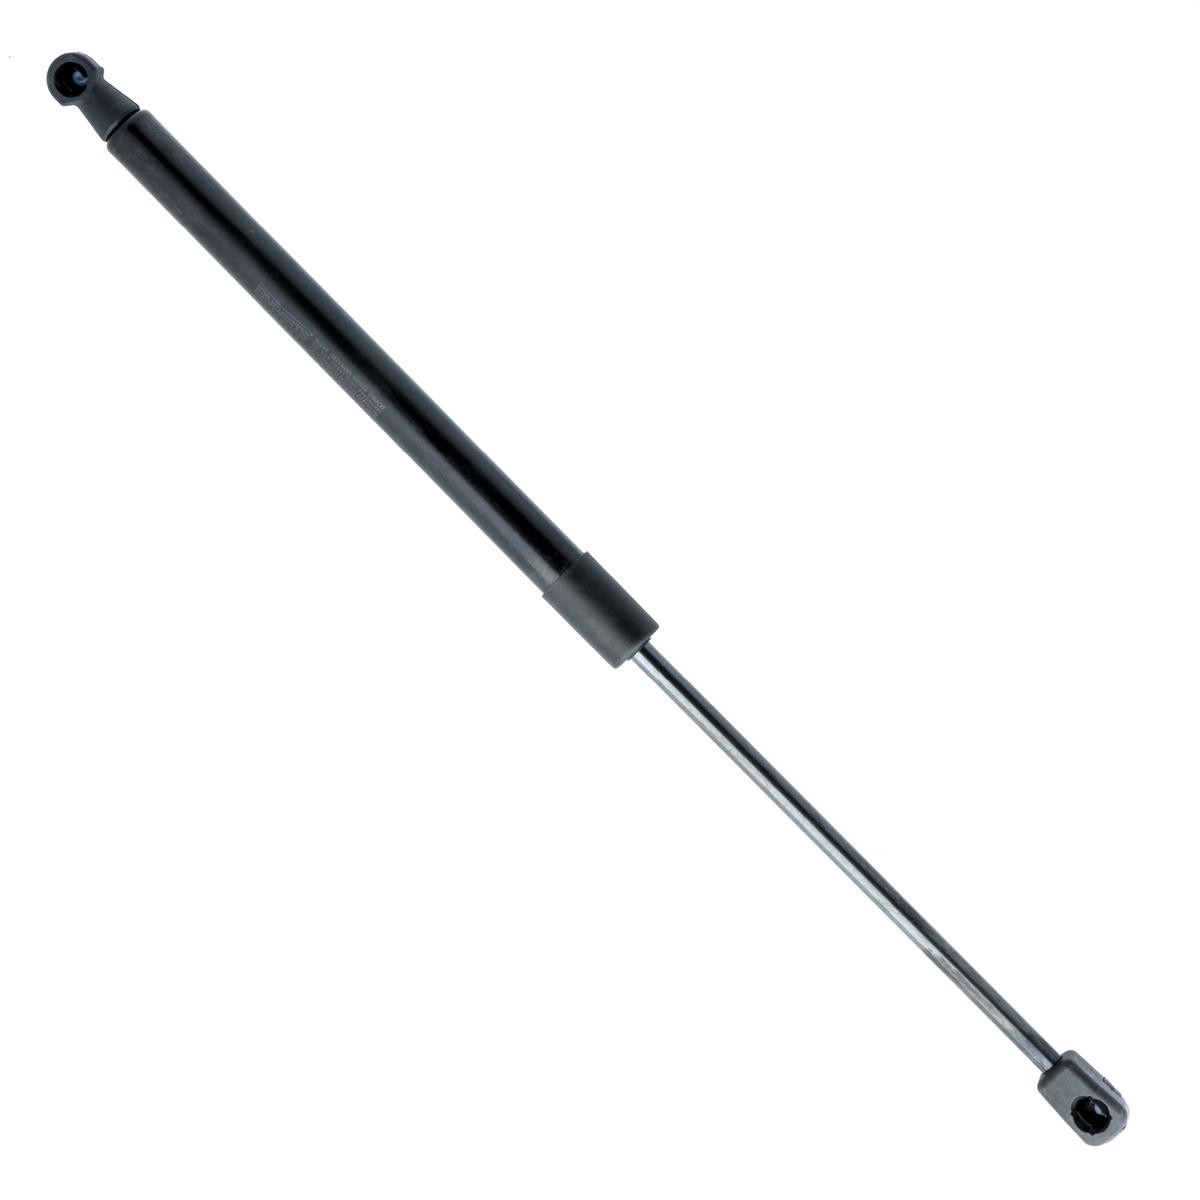 GS0896 EINPARTS 550N, 450 mm Stroke: 180mm Gas spring, boot- / cargo area EP10576GS buy